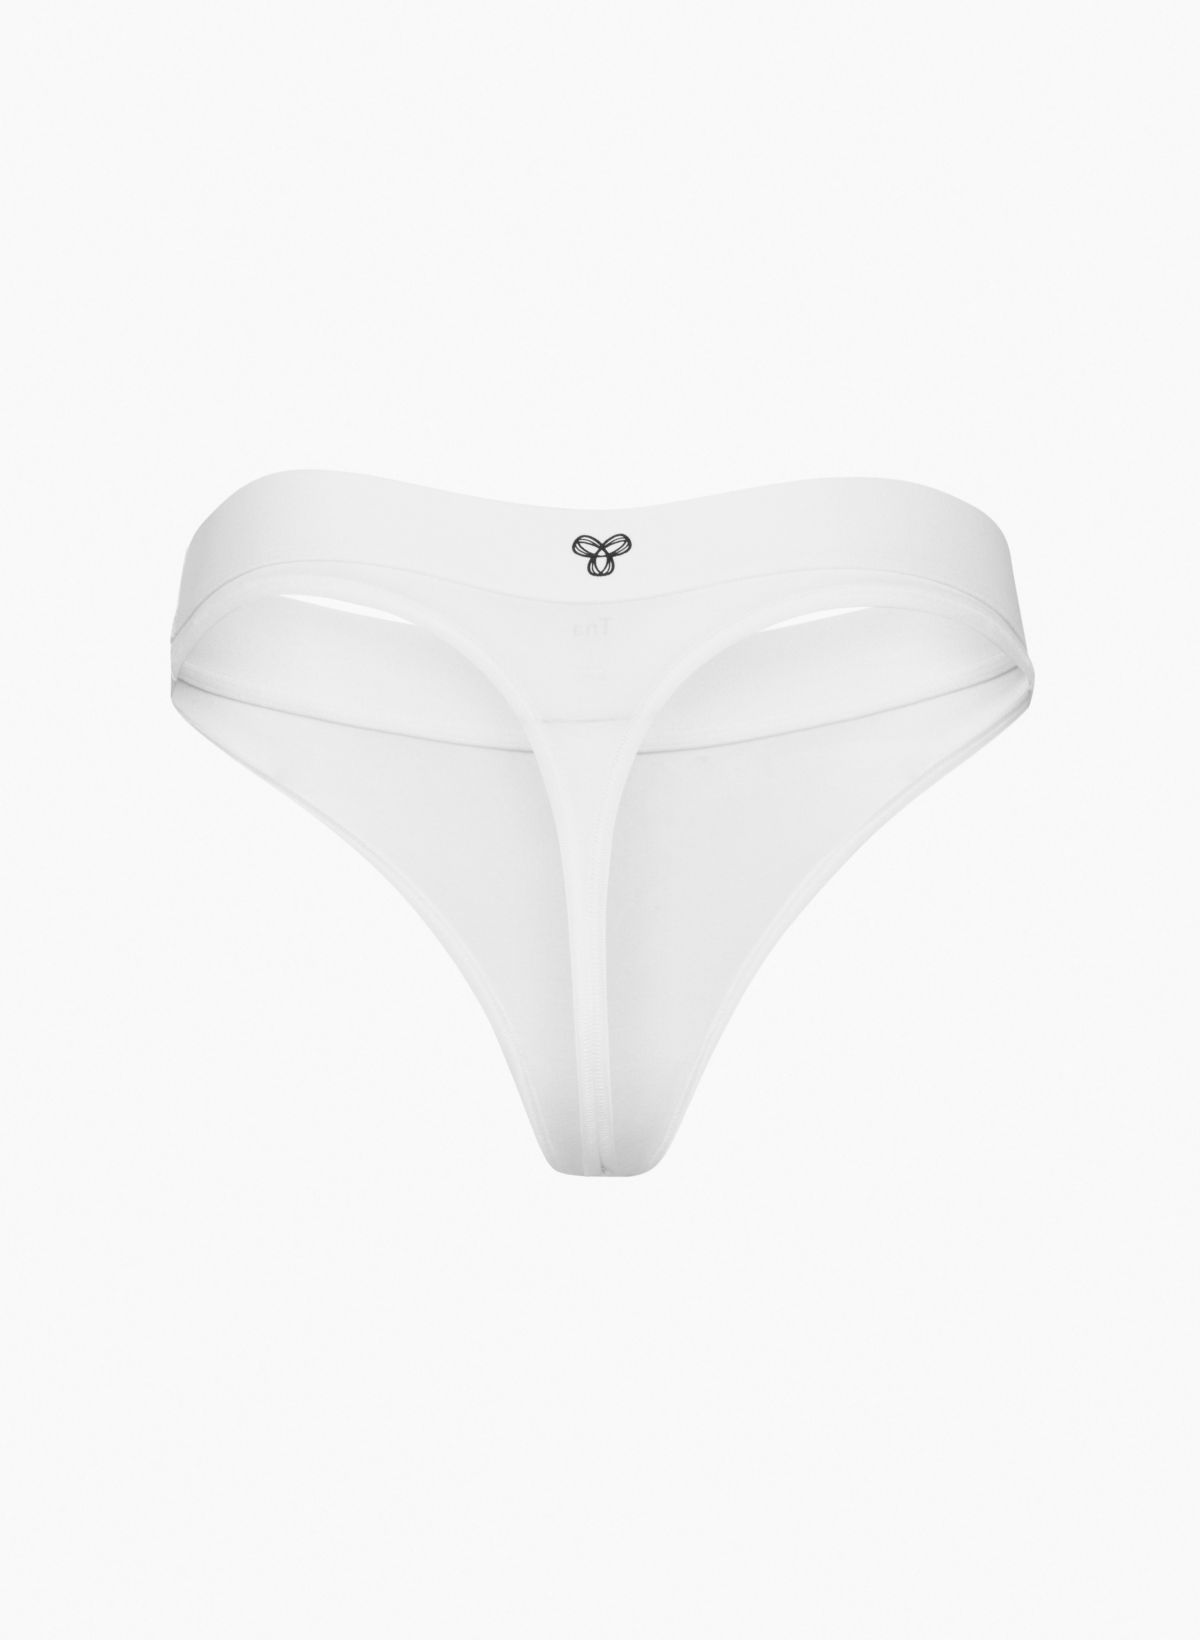 Bare The Easy Everyday Seamless Thong & Reviews